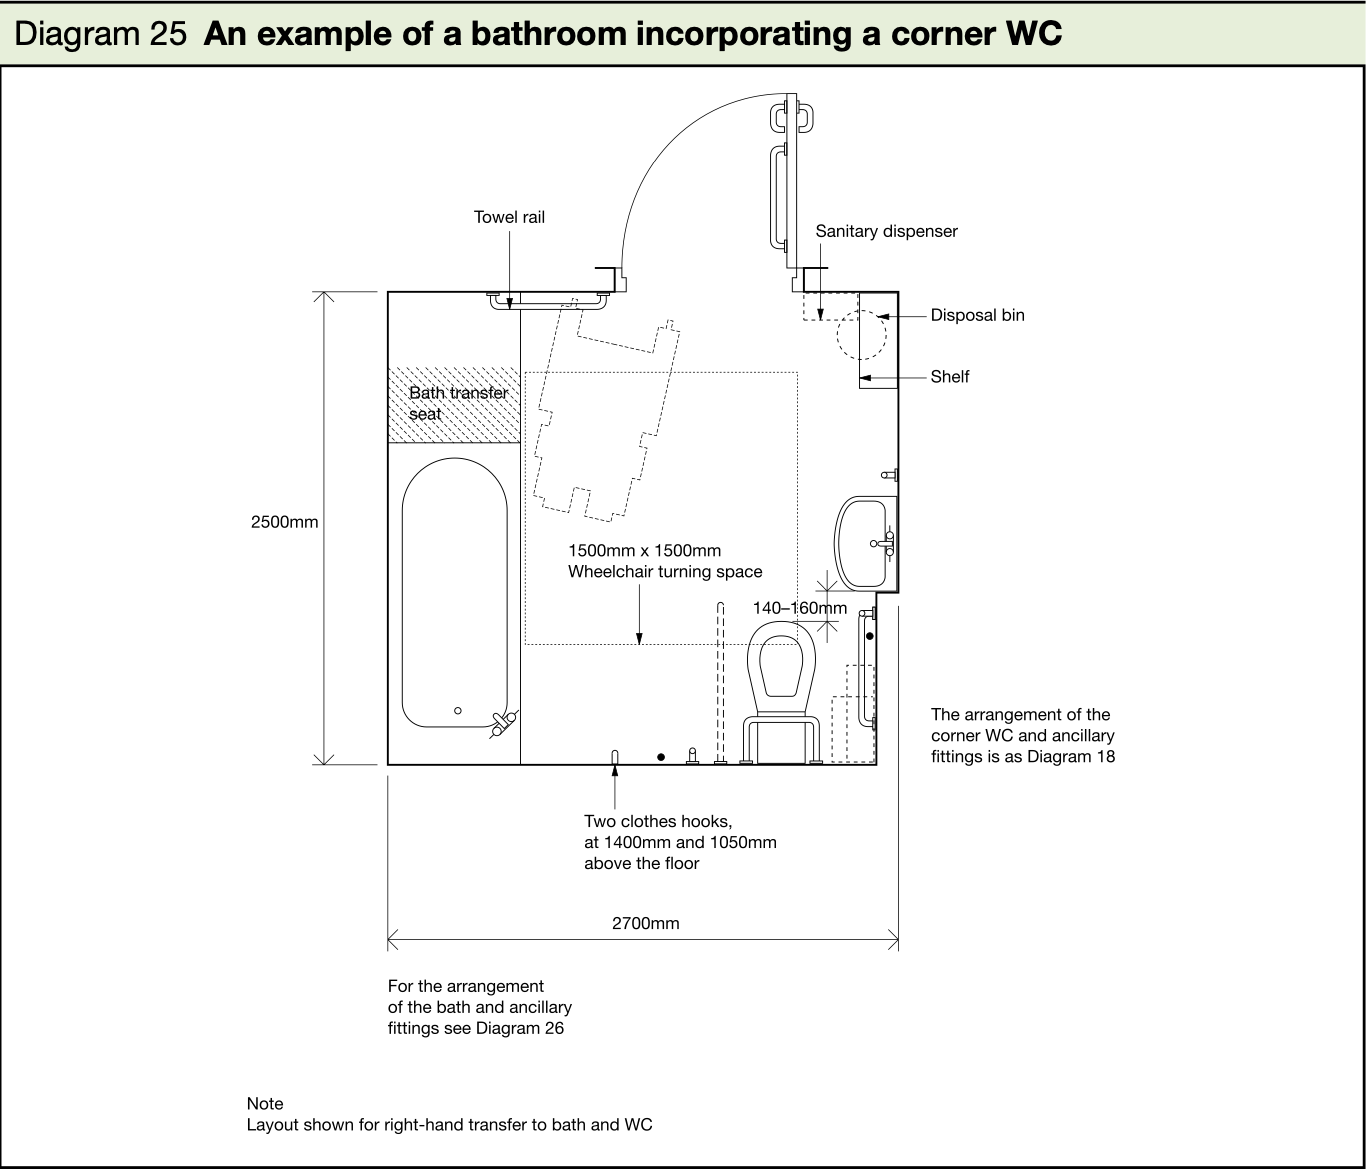 What are the Dimensions of a Disabled Bathroom? - DisalbeD Bathroom Incorporating A Corner WC